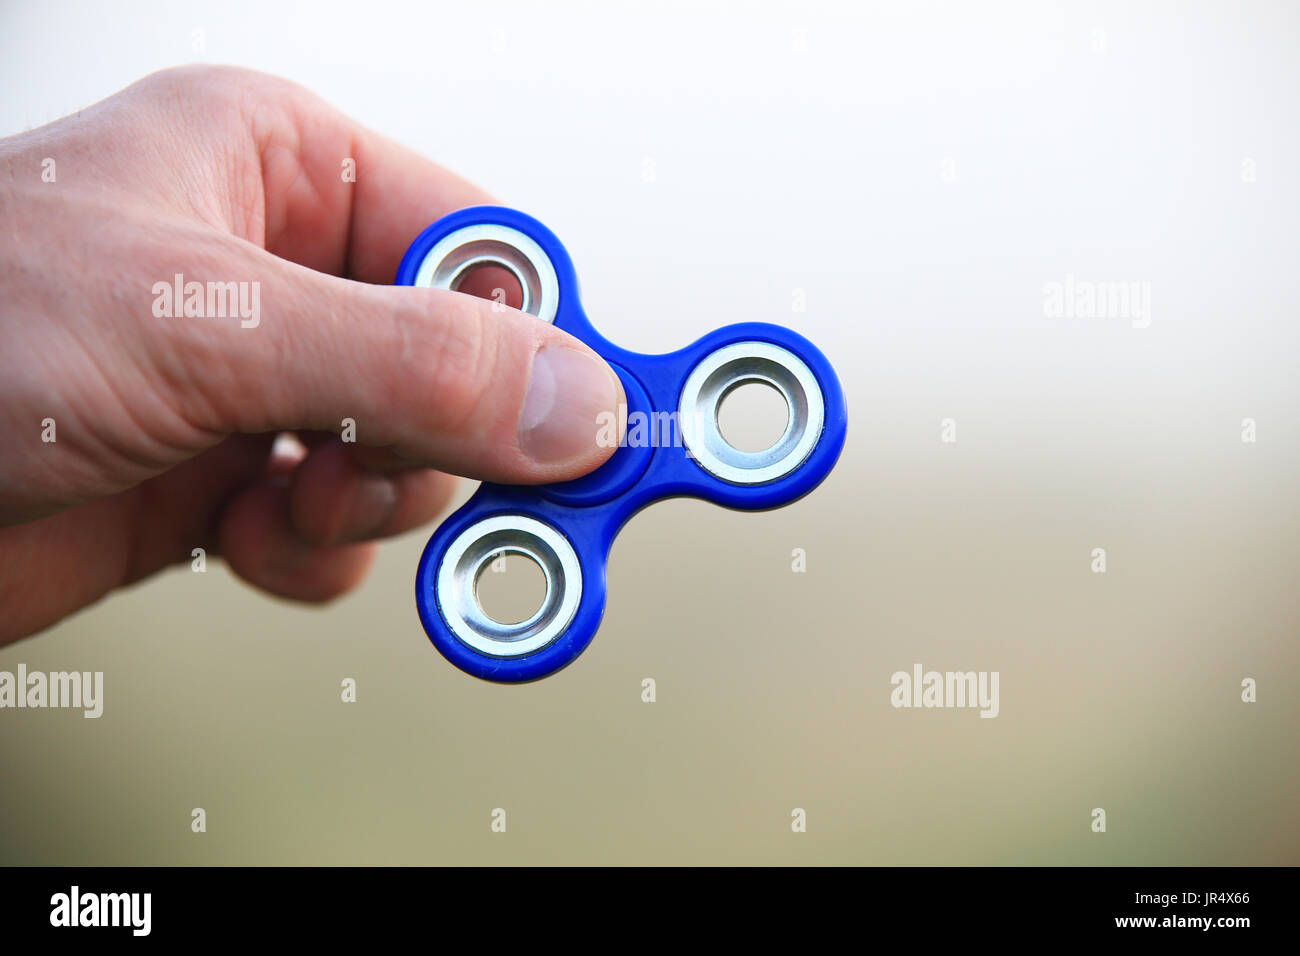 Spinner in hand close-up. Hand holds blue fidget closeup. Stock Photo